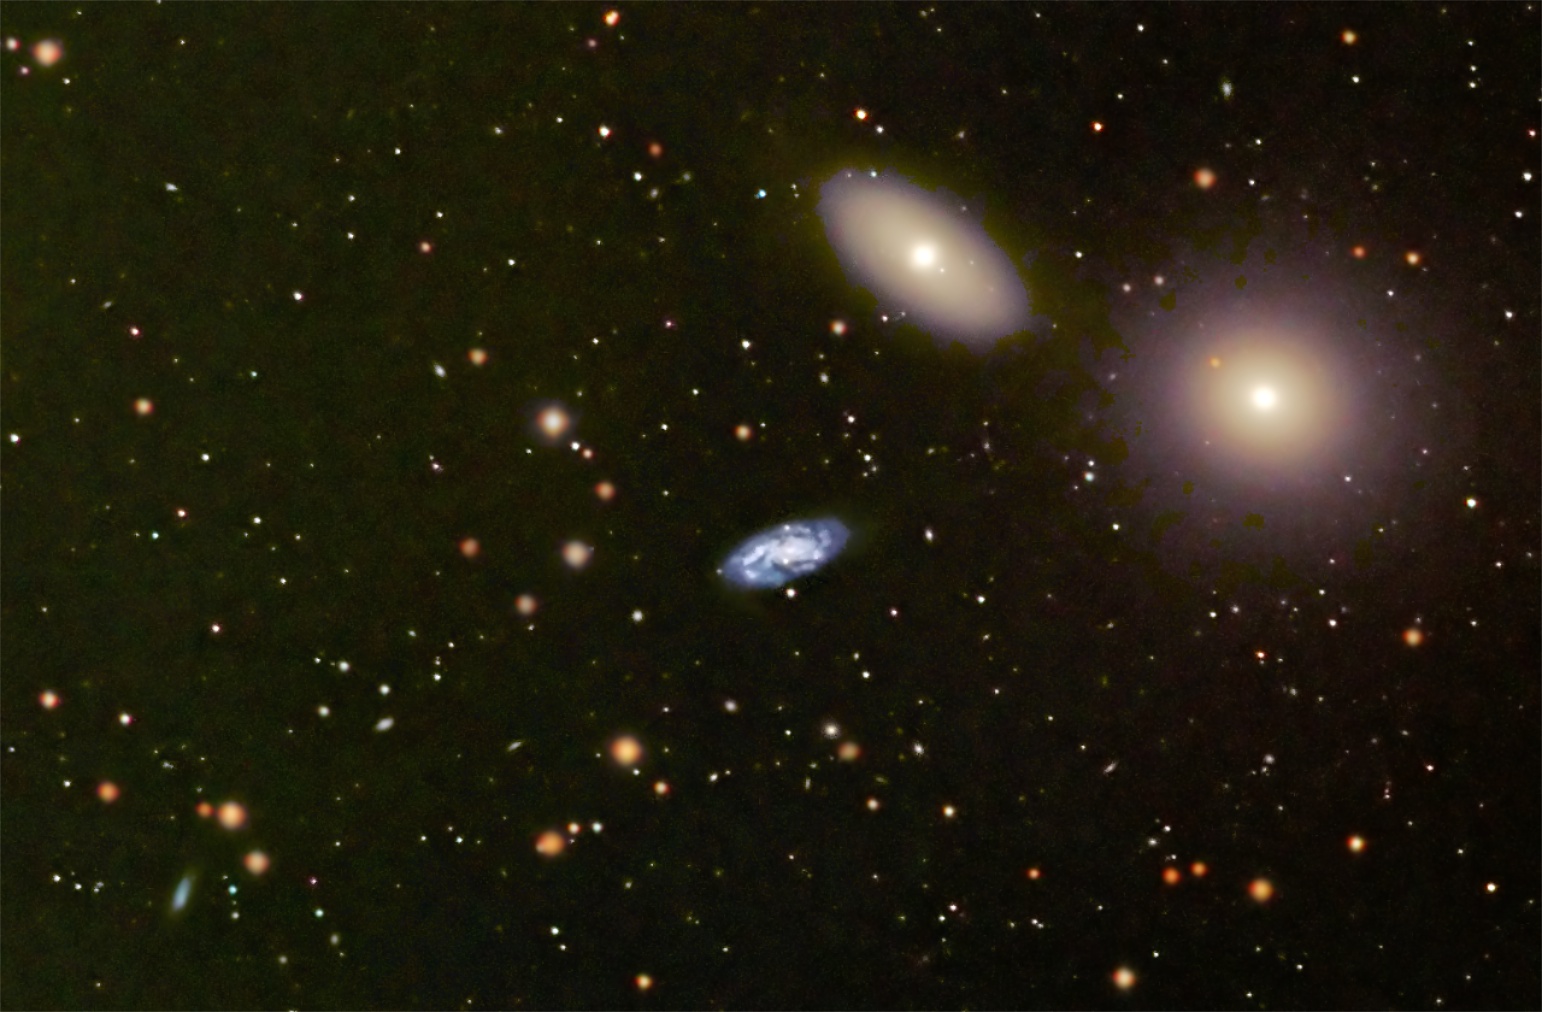 M105 and many other galaxies